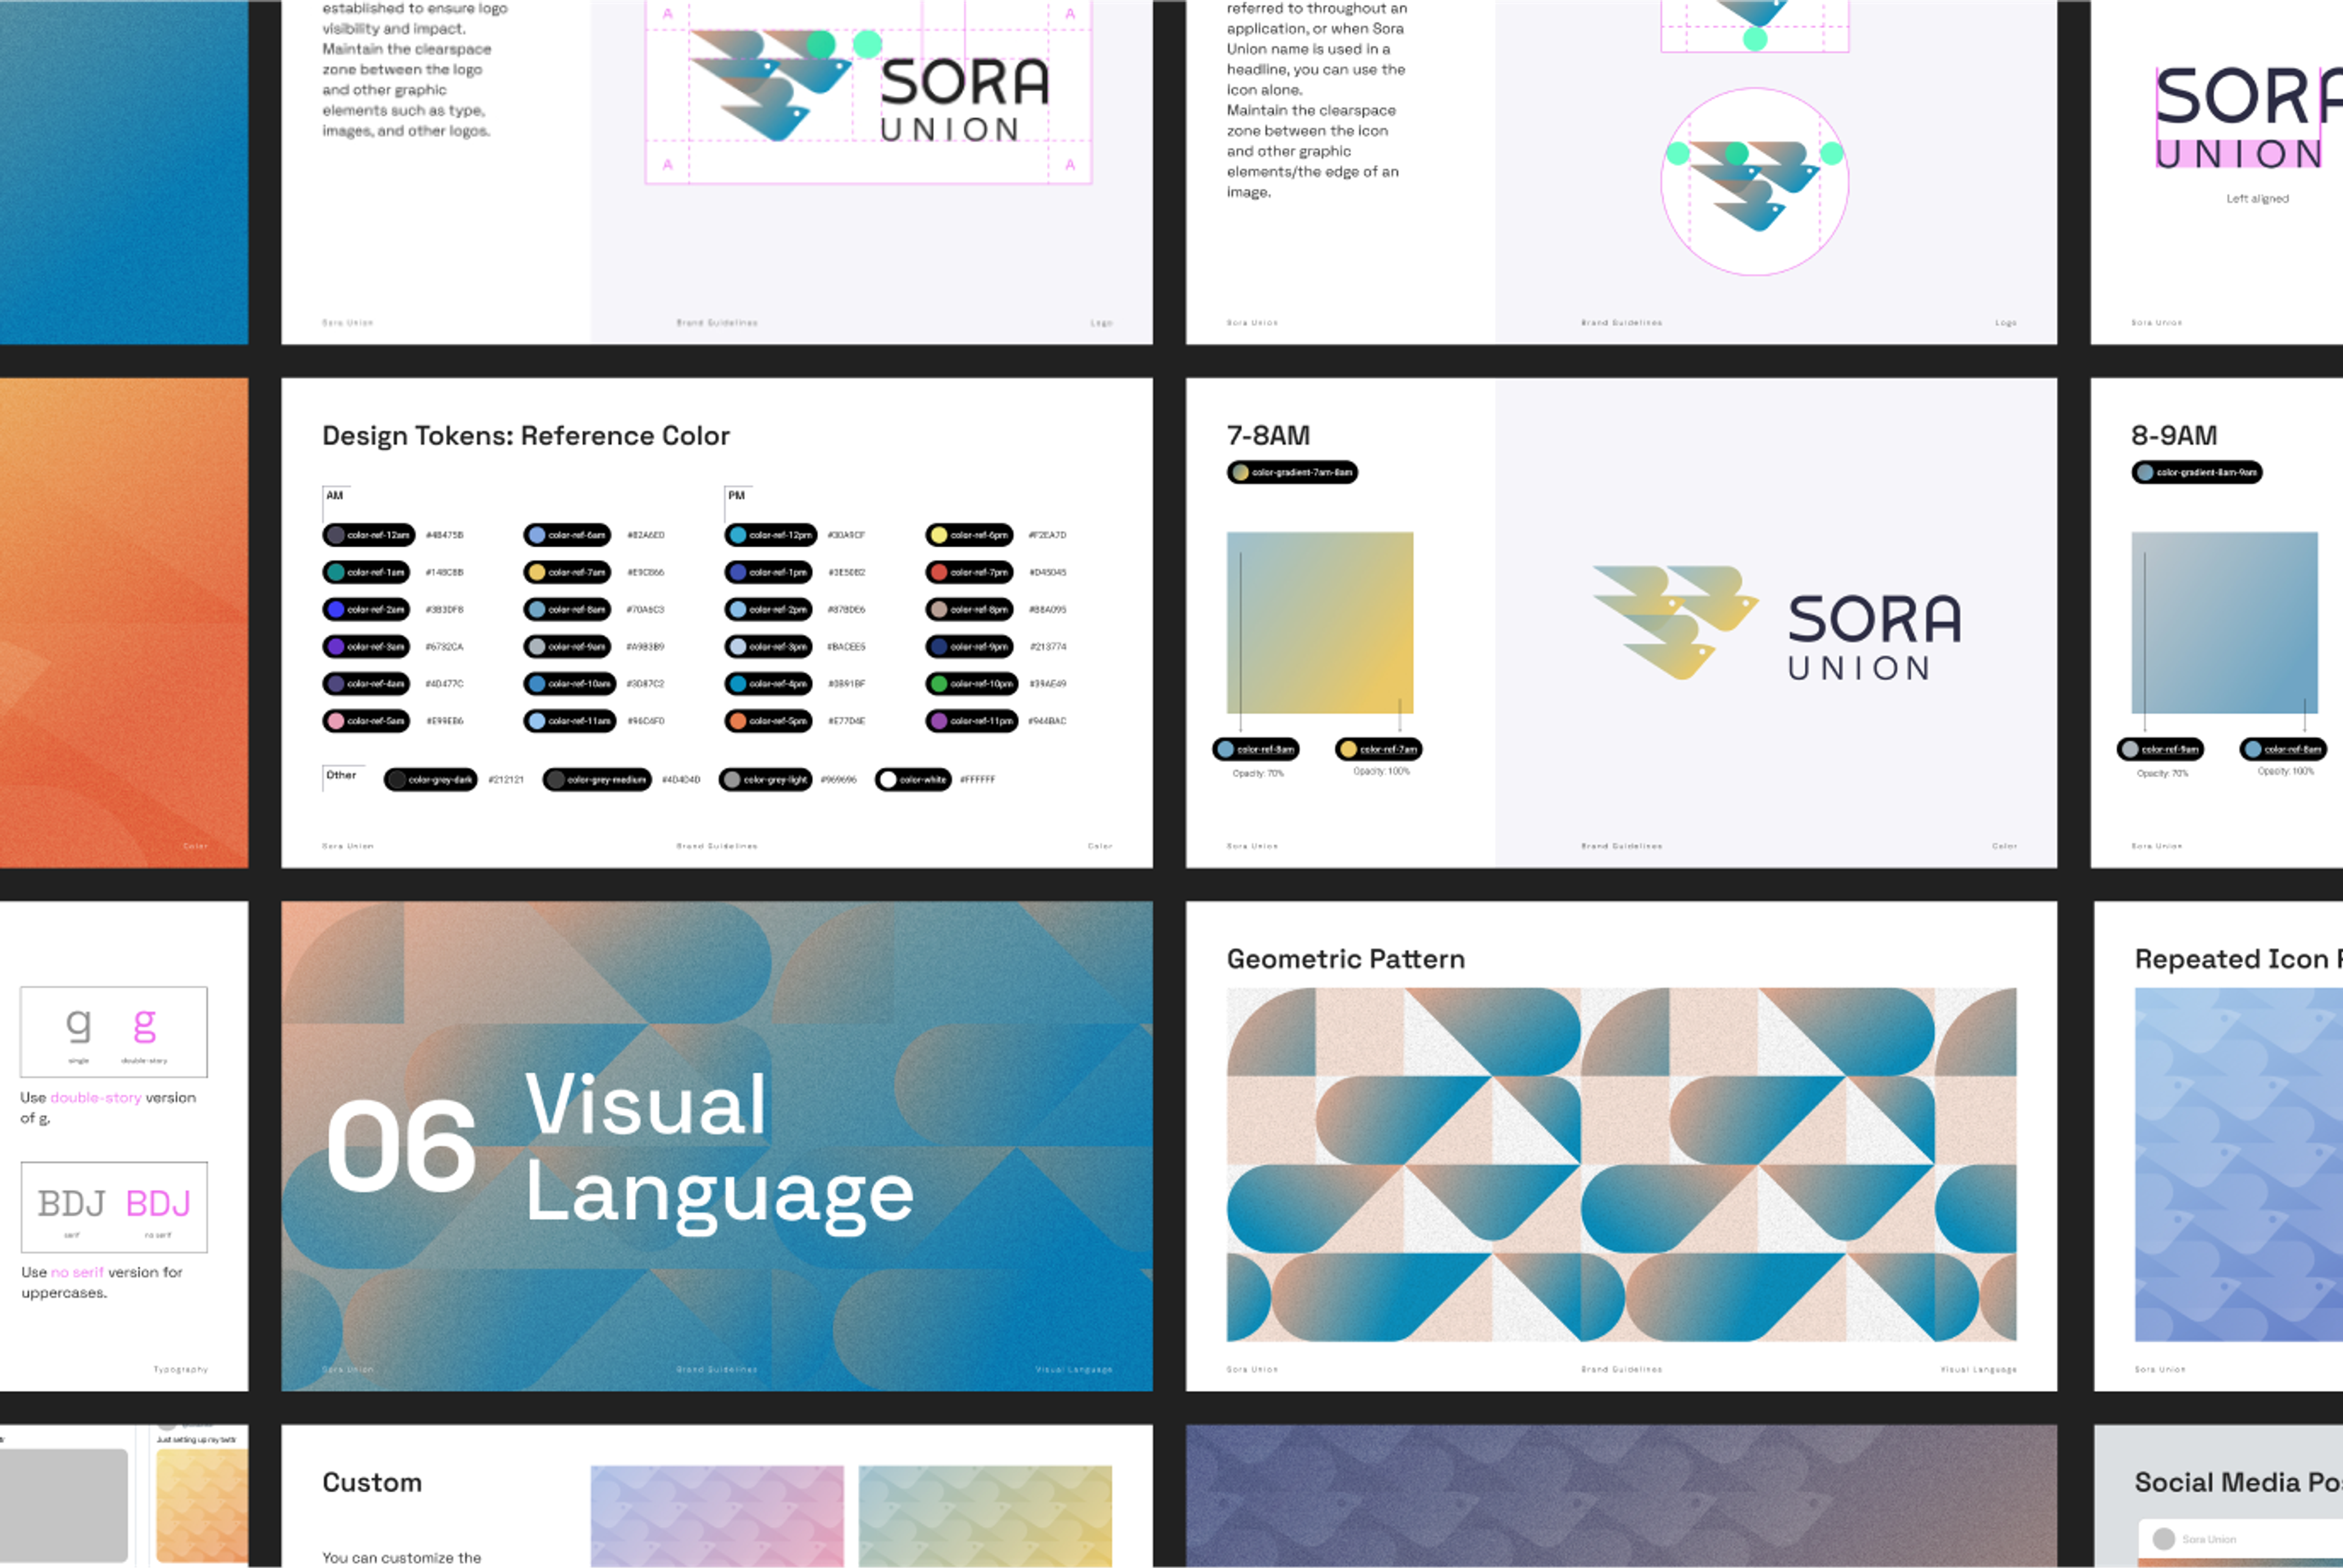 Collage of design assets using reference color design tokens, gradients, visual language, and logo variations